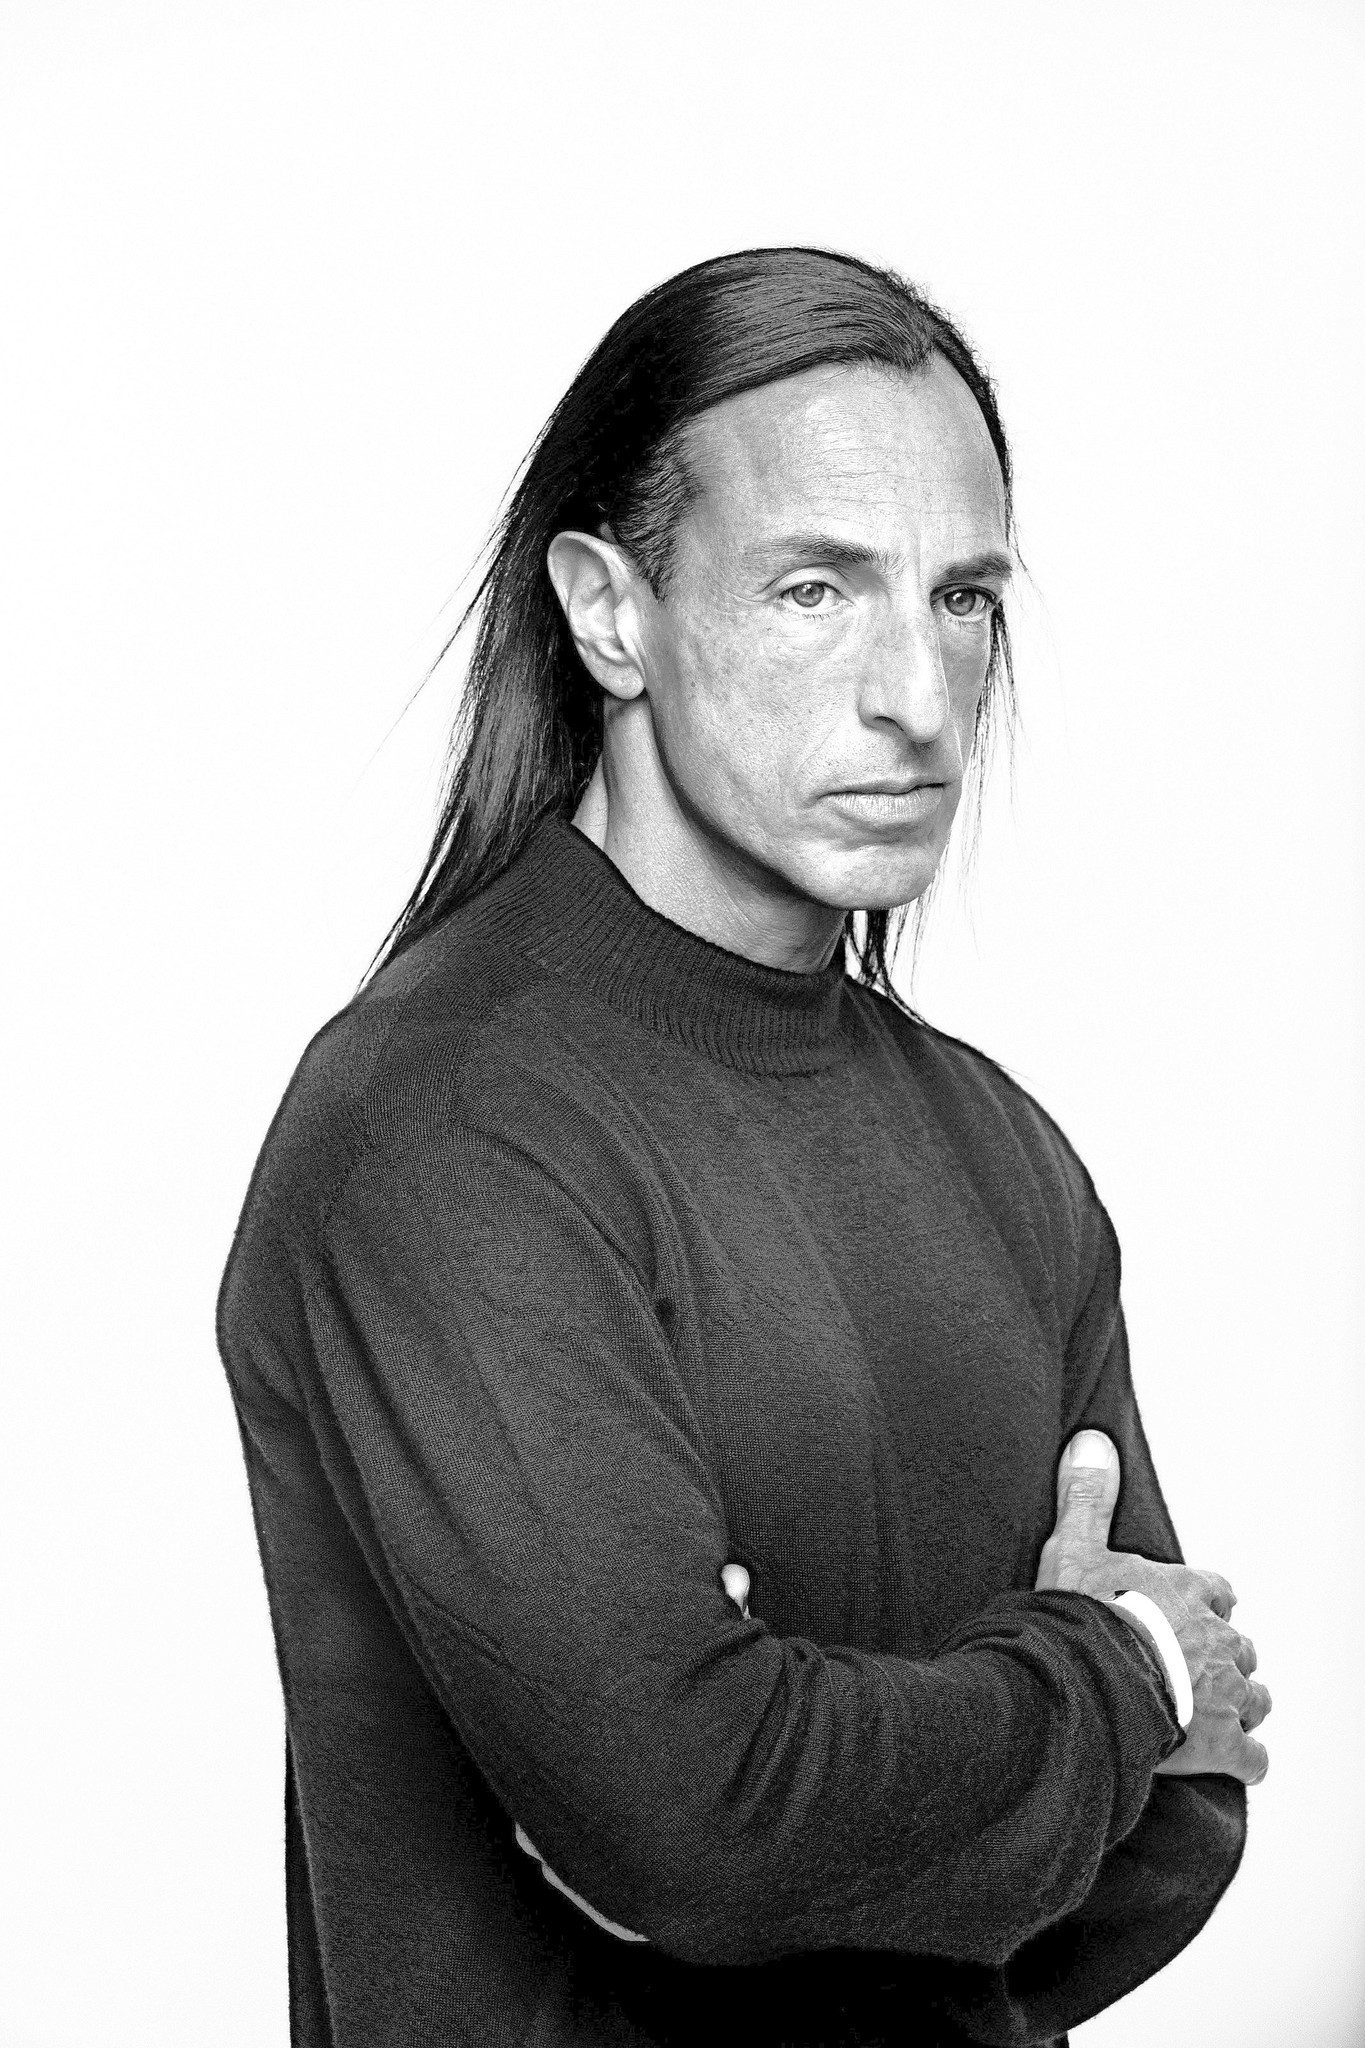 Fashion designer Rick Owens is ready to tap L.A.'s gritty side again